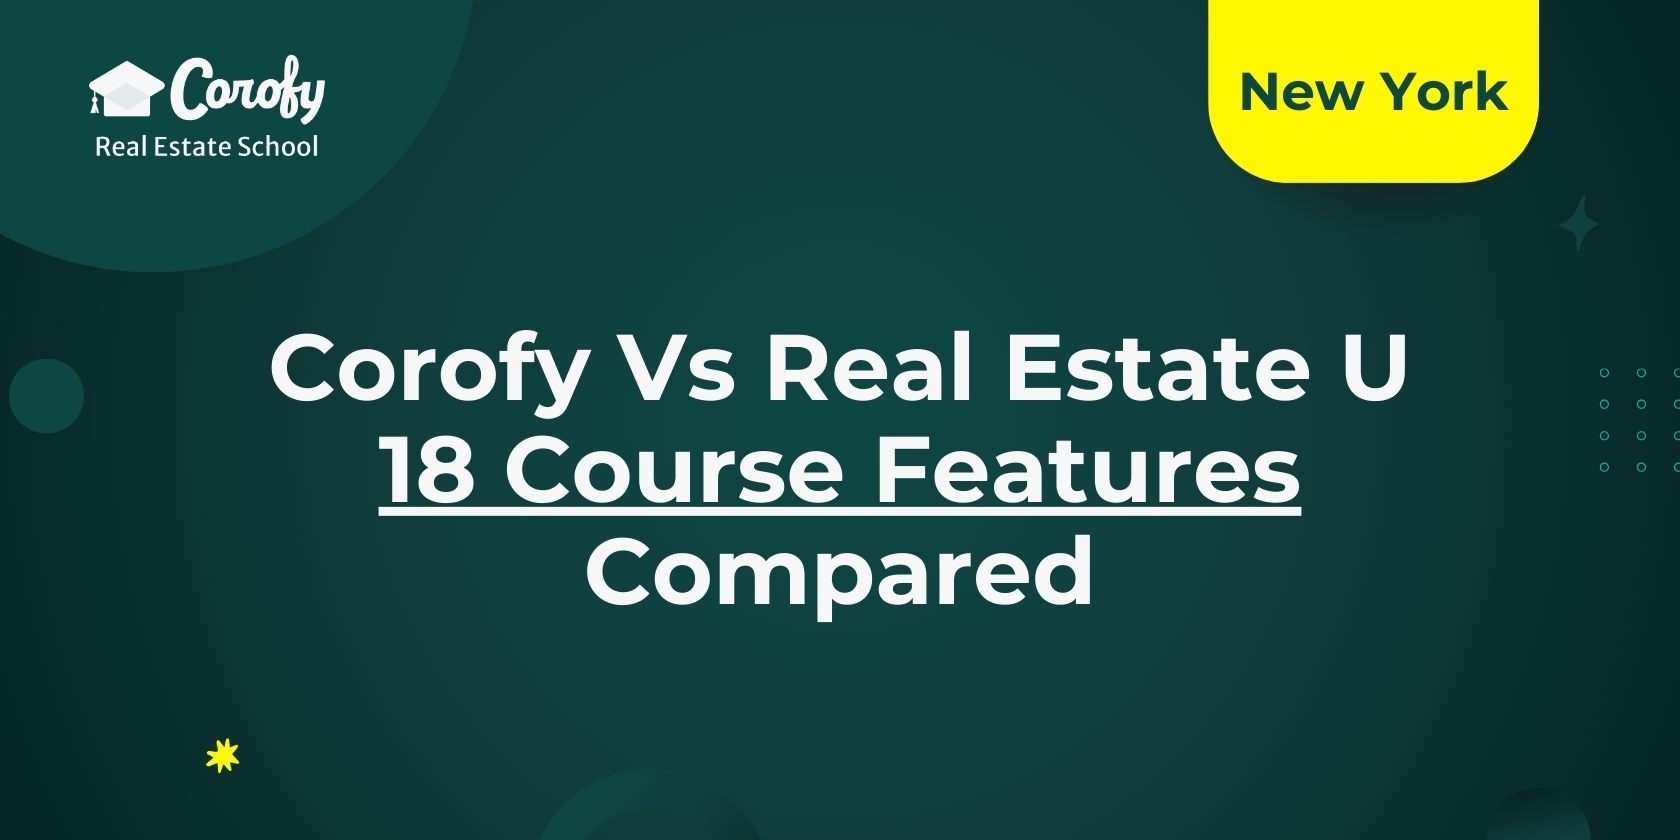 Corofy vs Real Estate U - 18 Course Features Compared